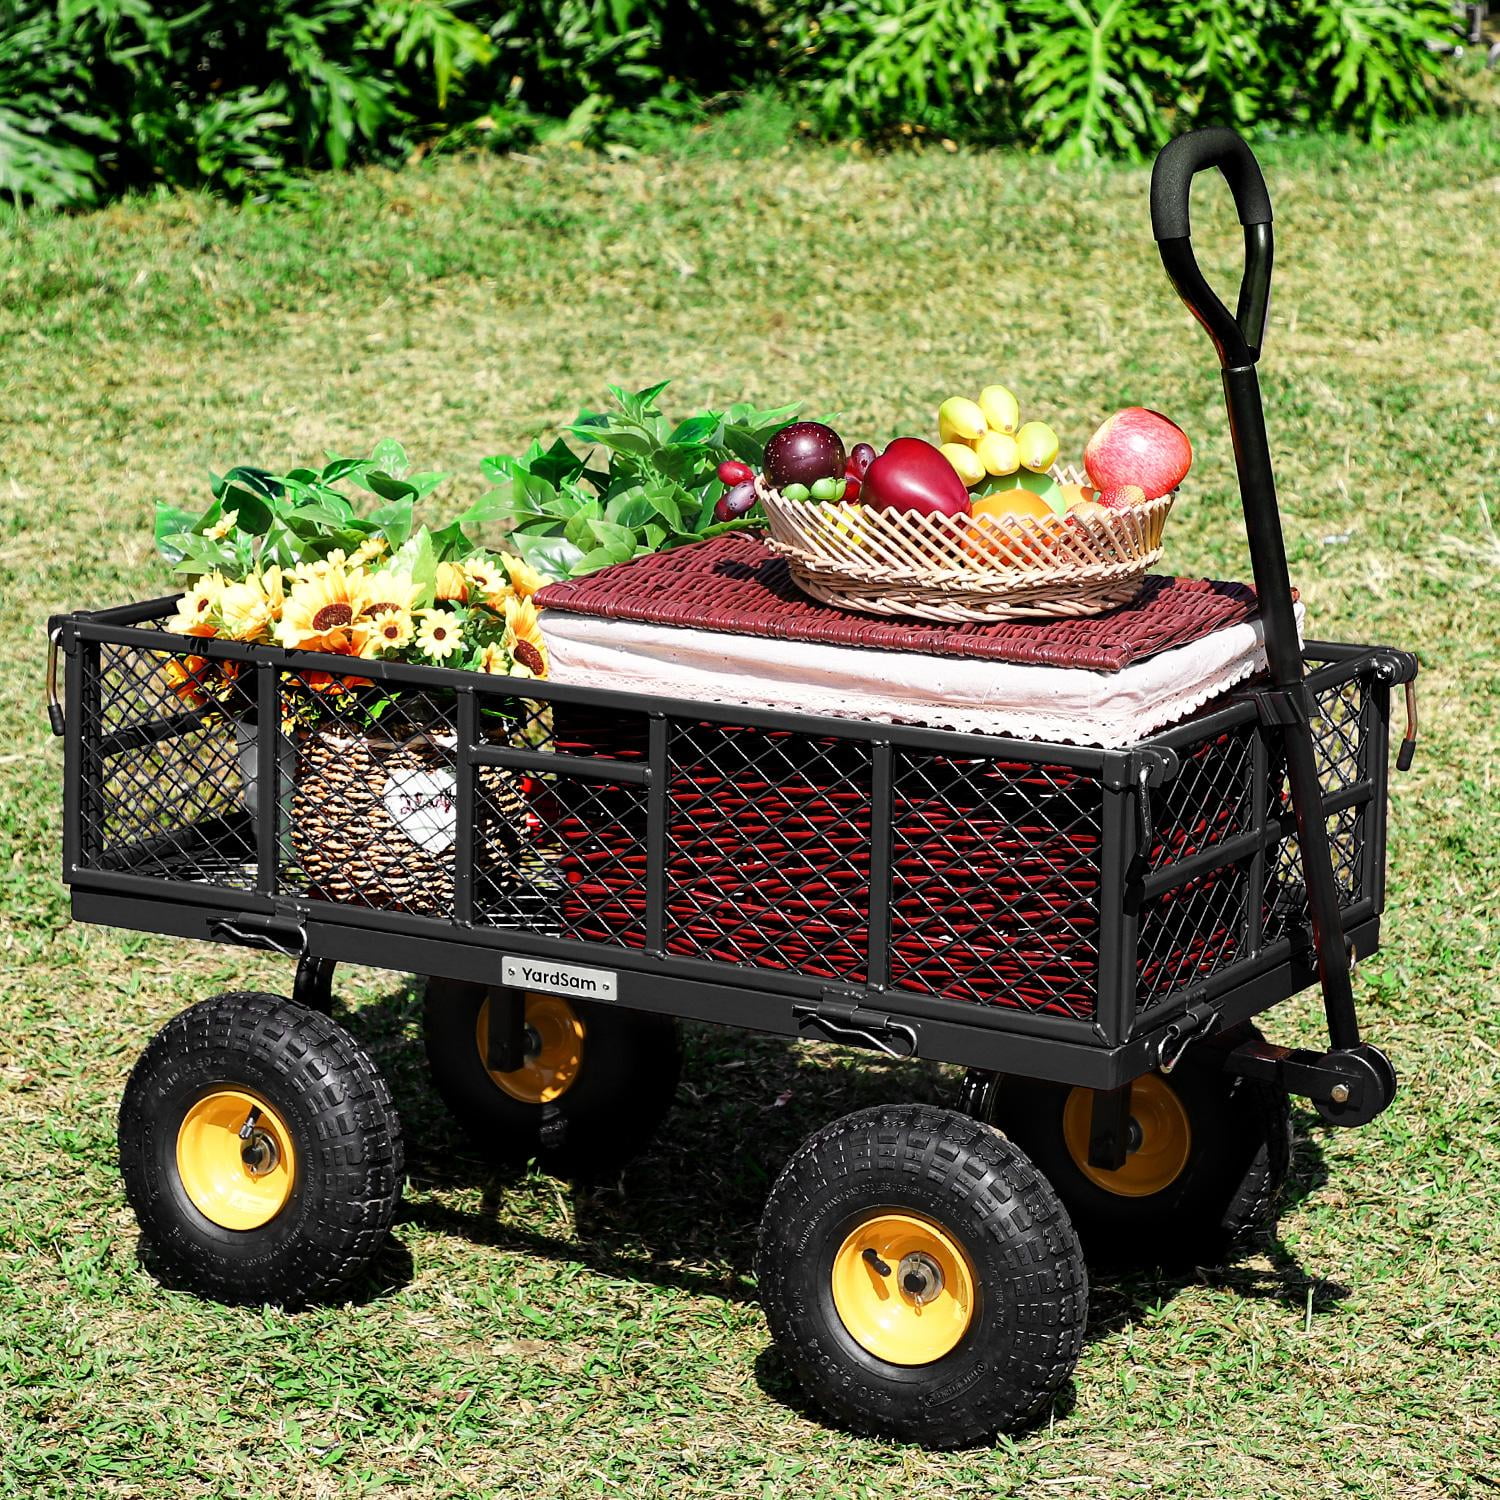 Lawn Wagon Cart Heavy Duty Black 10 Inch Wheels and 600D Polyester with PVC Coated Liner Long Handle Yardsam Utility Steel Garden Carts and Wagons Removable Sides 400lb Weight Capacity 